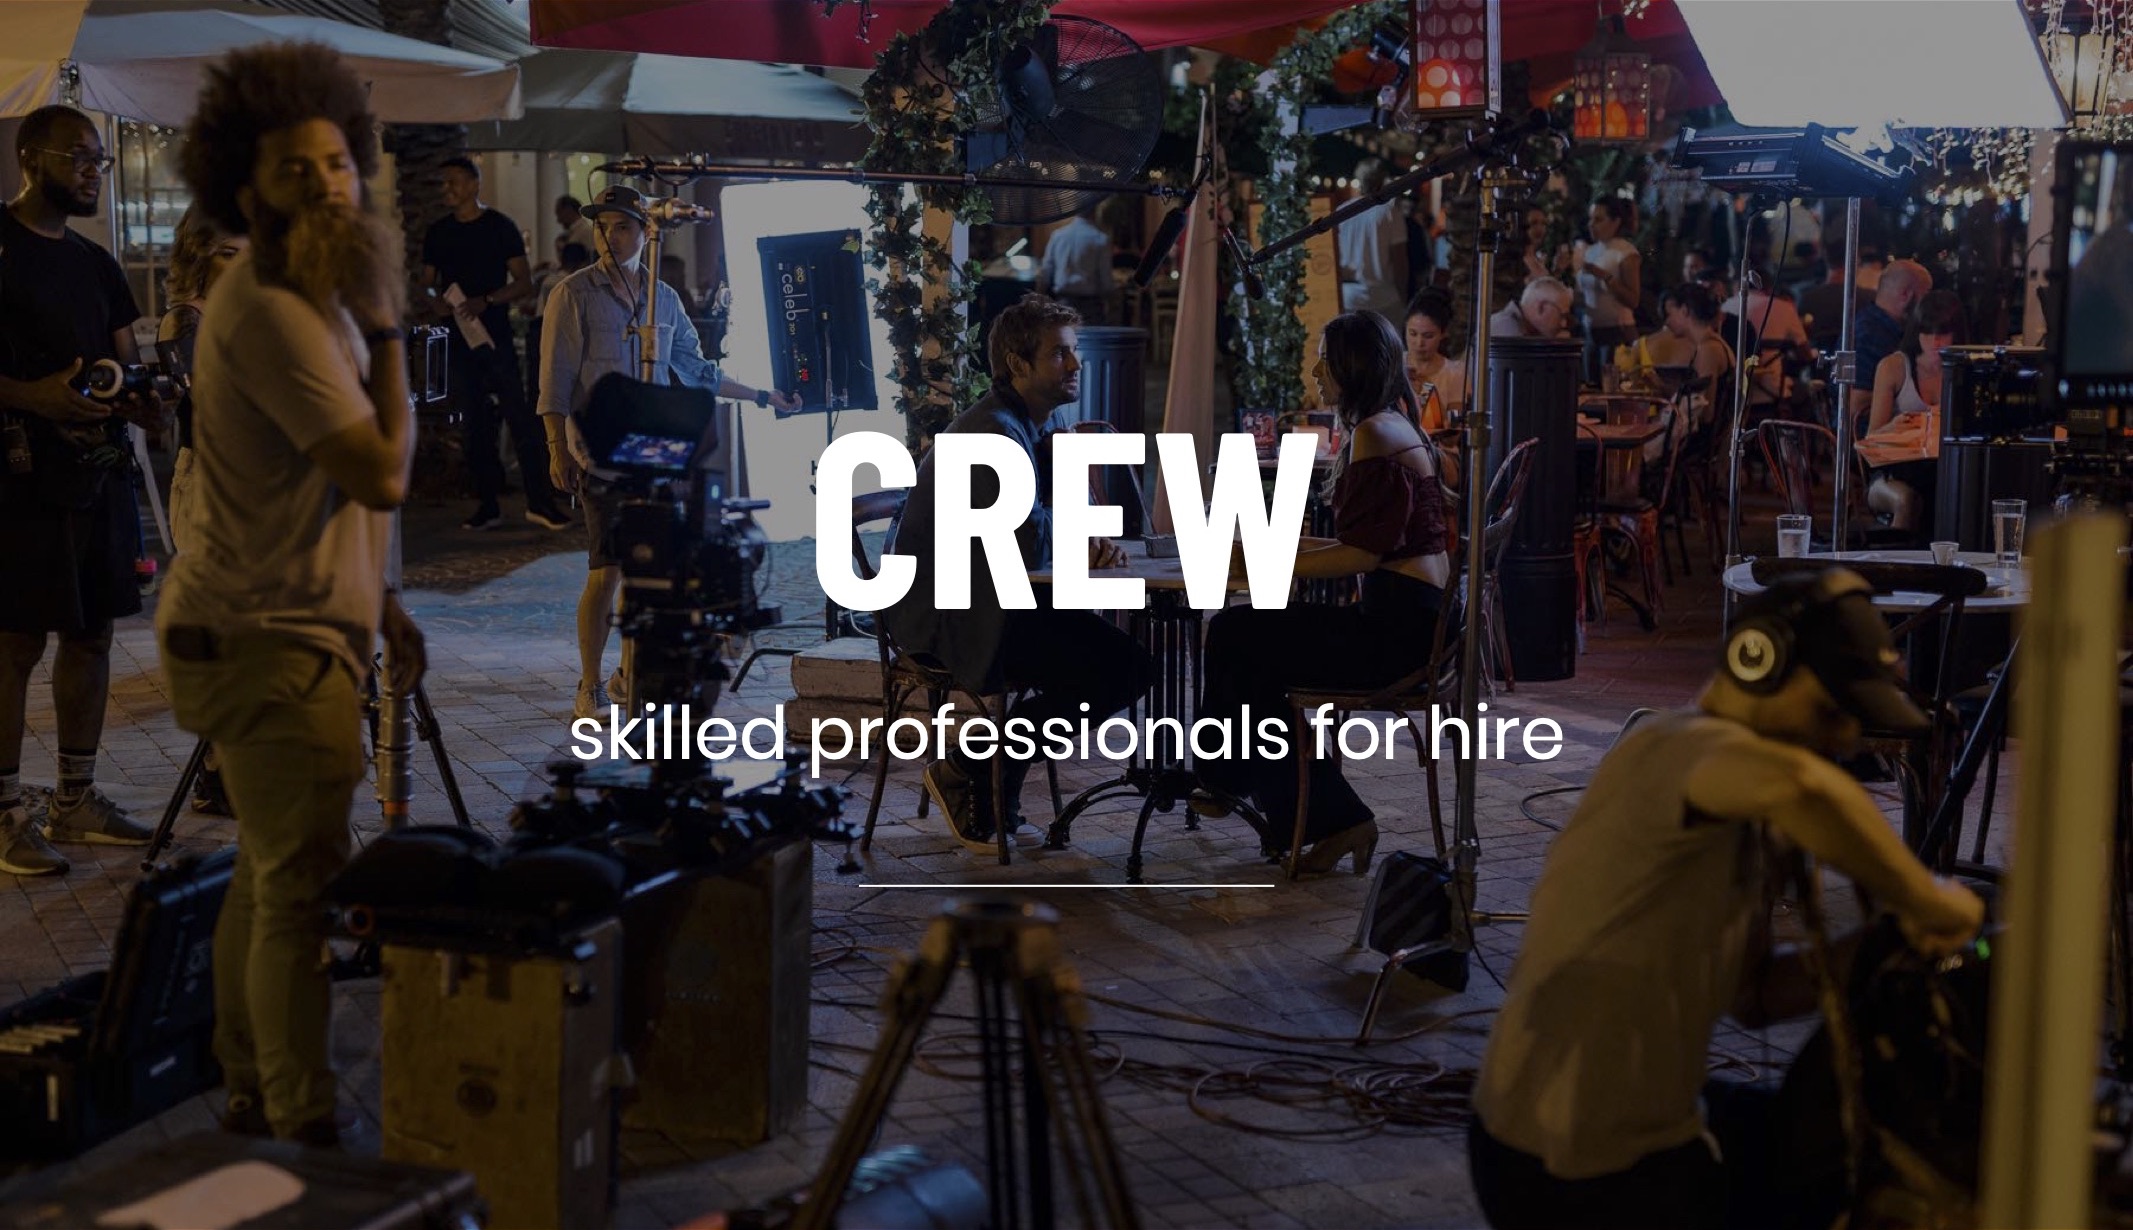 Production Resources White Crew skilled professionals for hire title on backdrop of crew surrounding a set with a man and woman sitting at a table